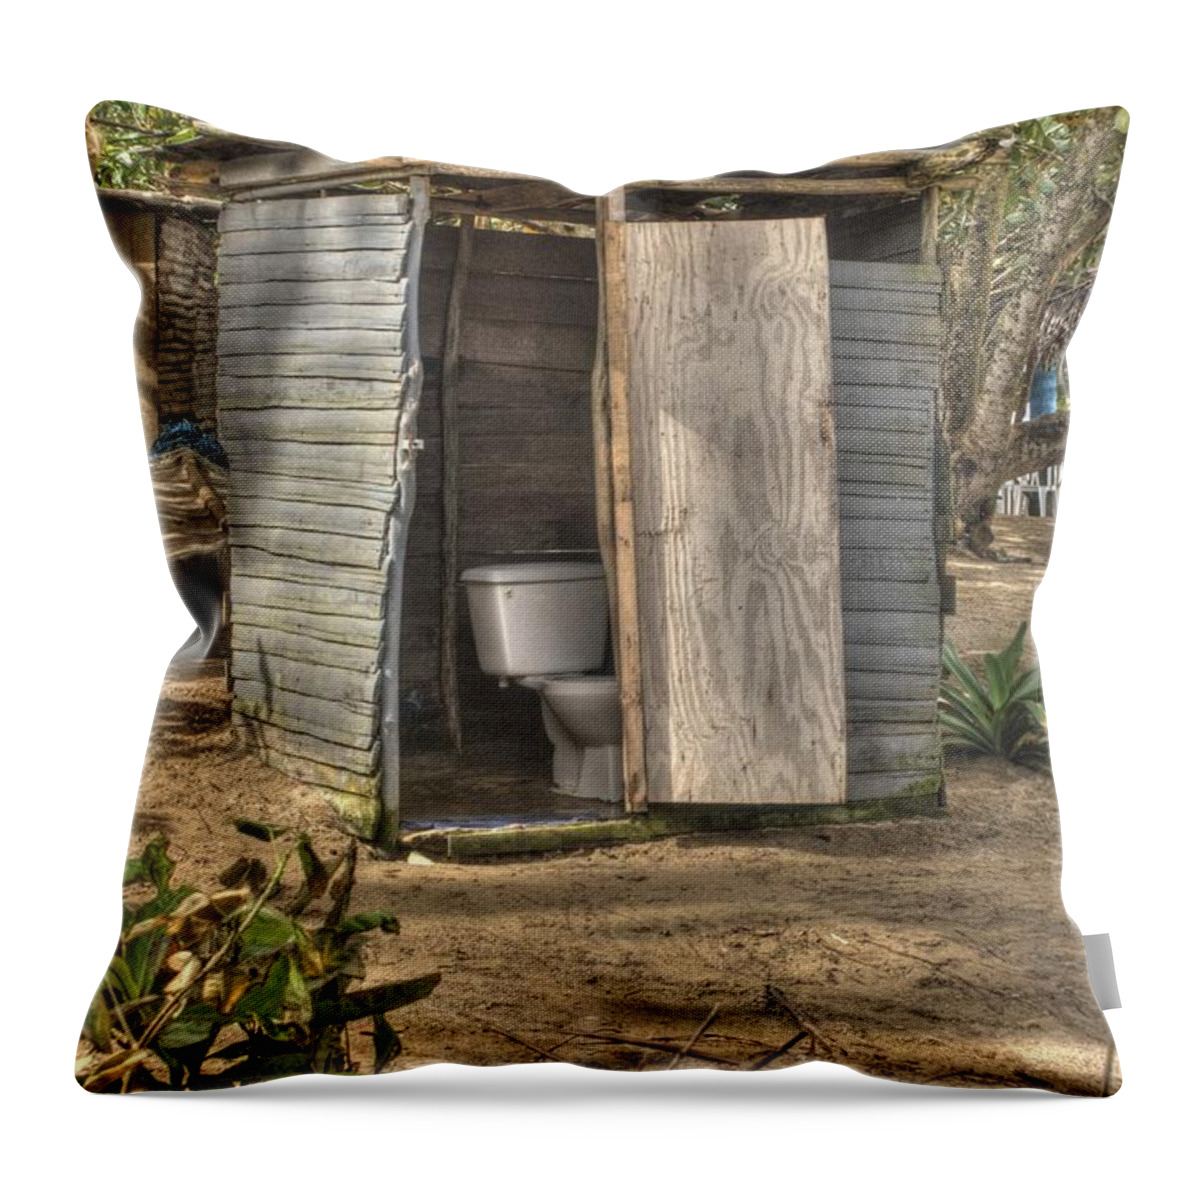 Lavatory Throw Pillow featuring the photograph Not For The Faint Hearted #1 by David Birchall